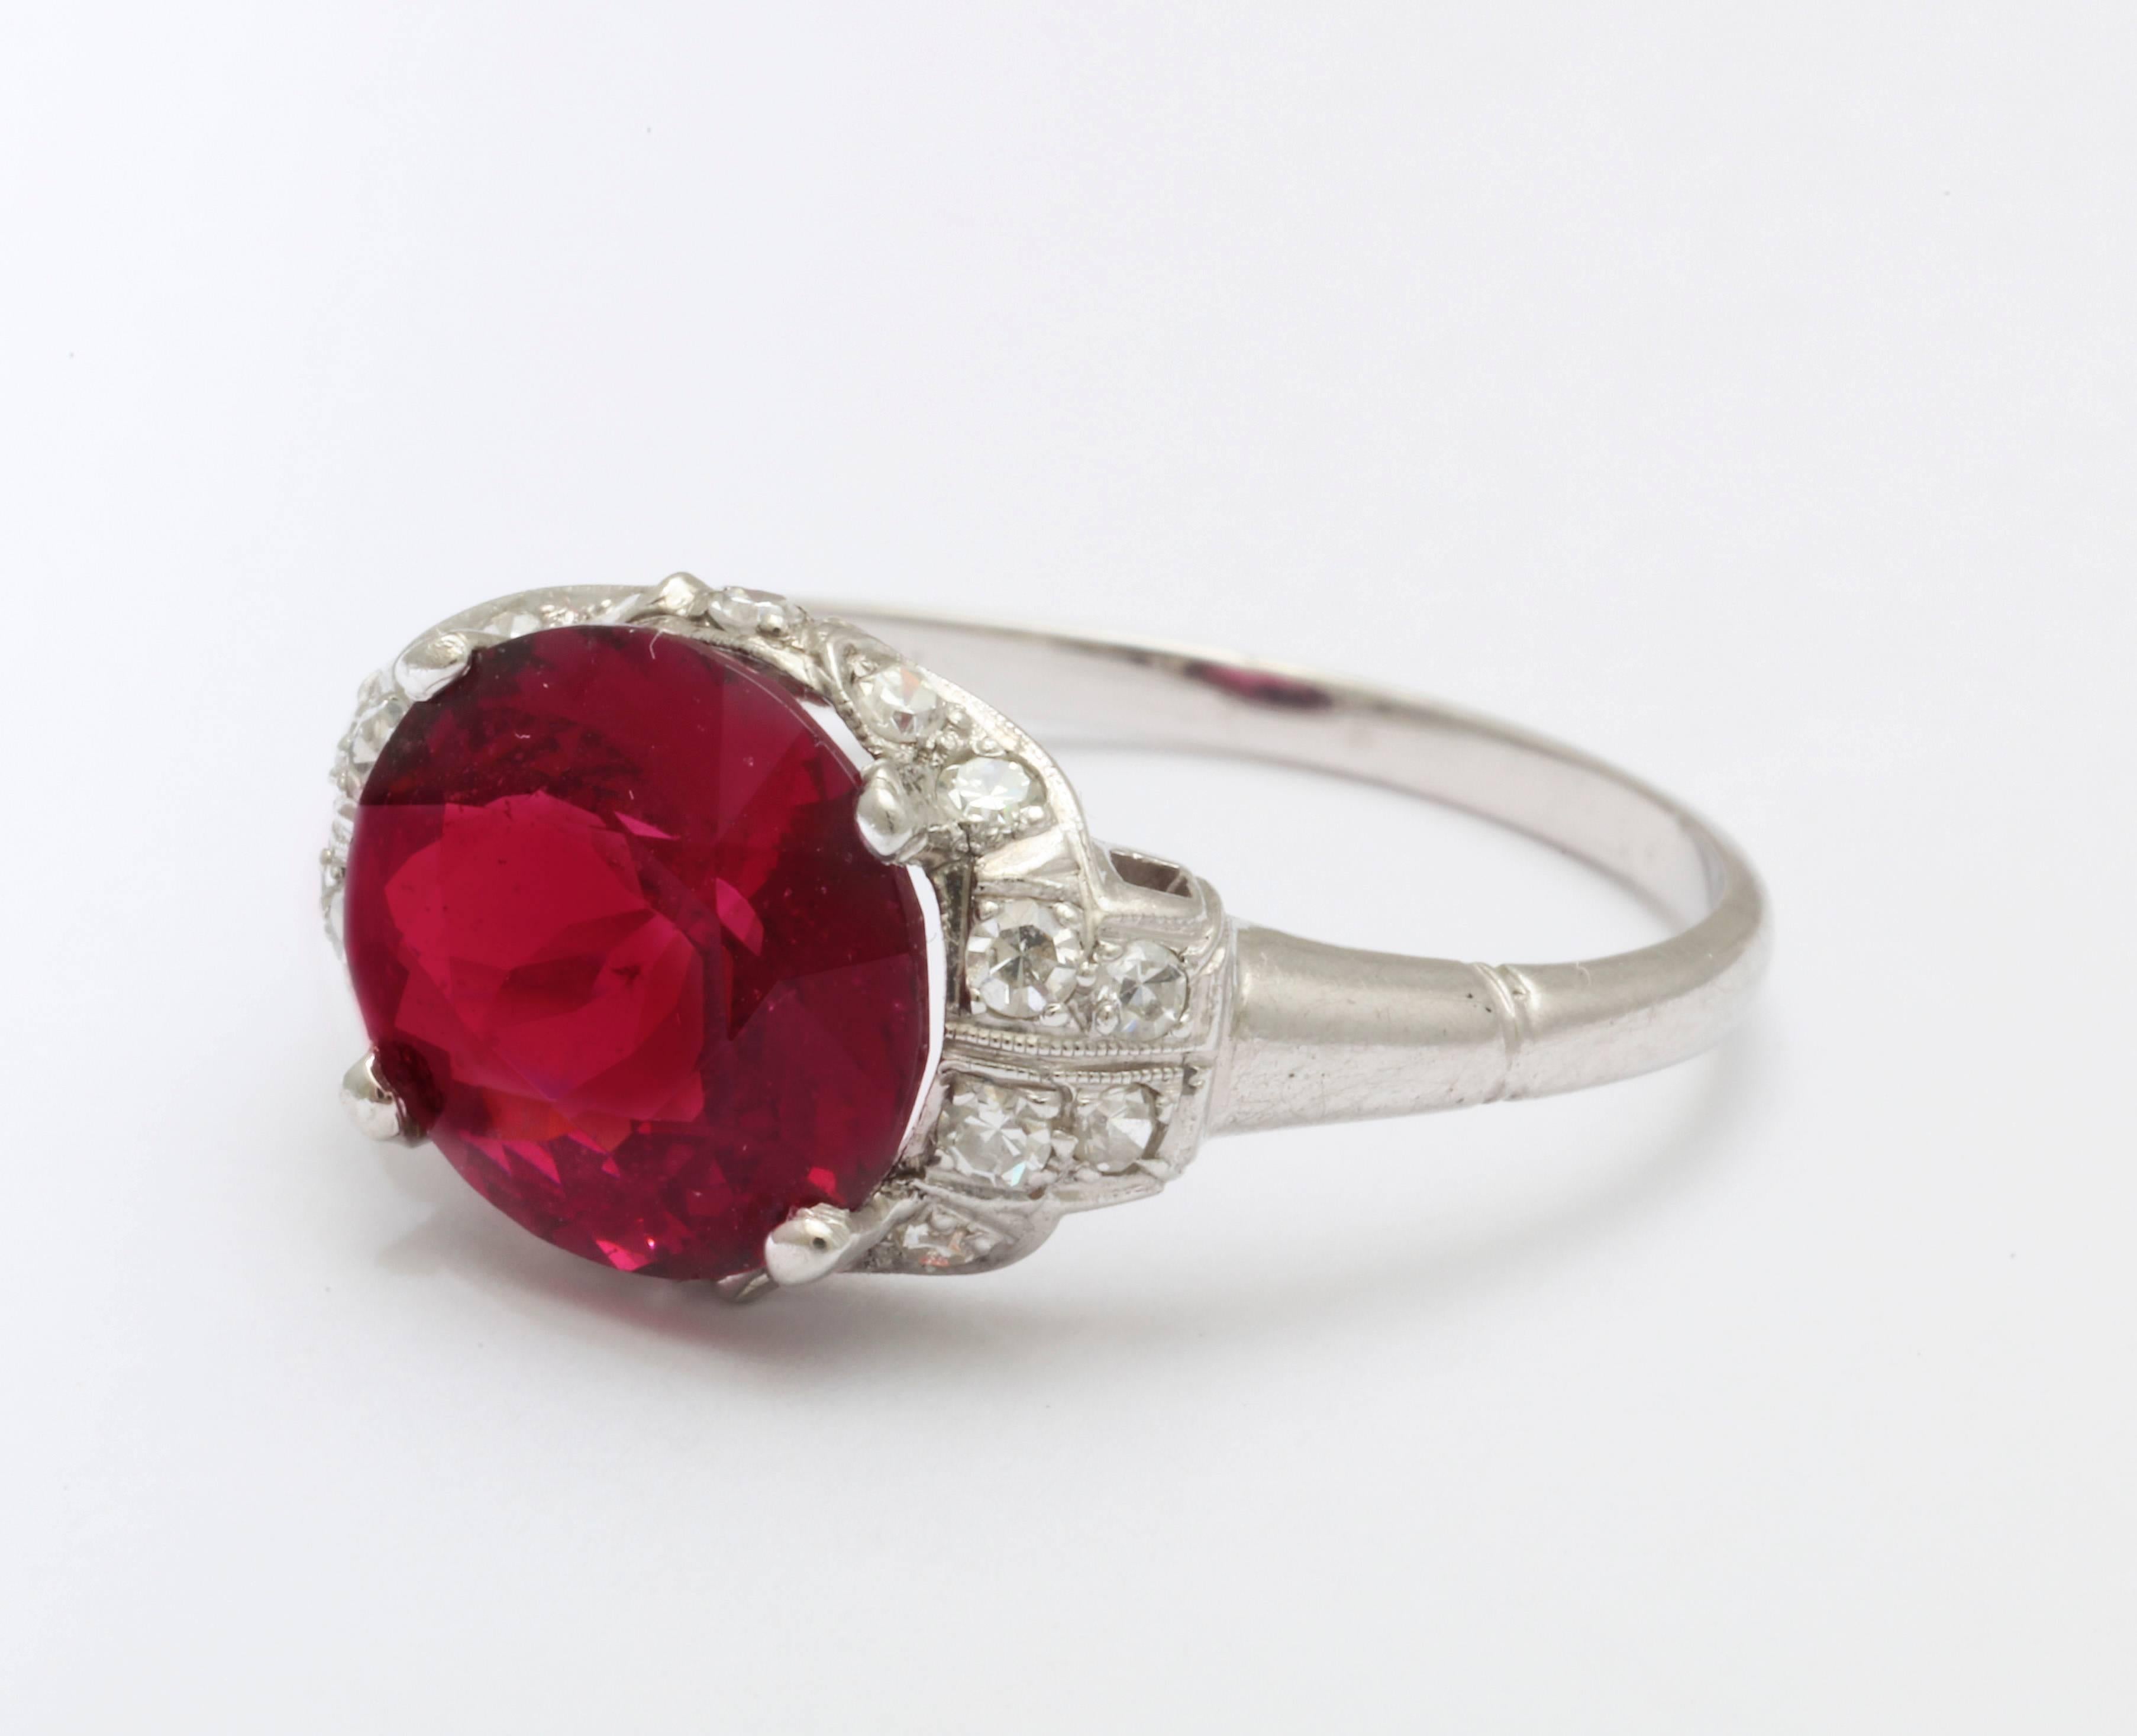 So beautiful you can taste it as an engagement ring or fashion addition, this 3.6 ct rhodolite garnet and diamond ring, from the mid 20th century holds single cut diamonds of .41cts of bright G-H color and VS clarity that surround the red fiery